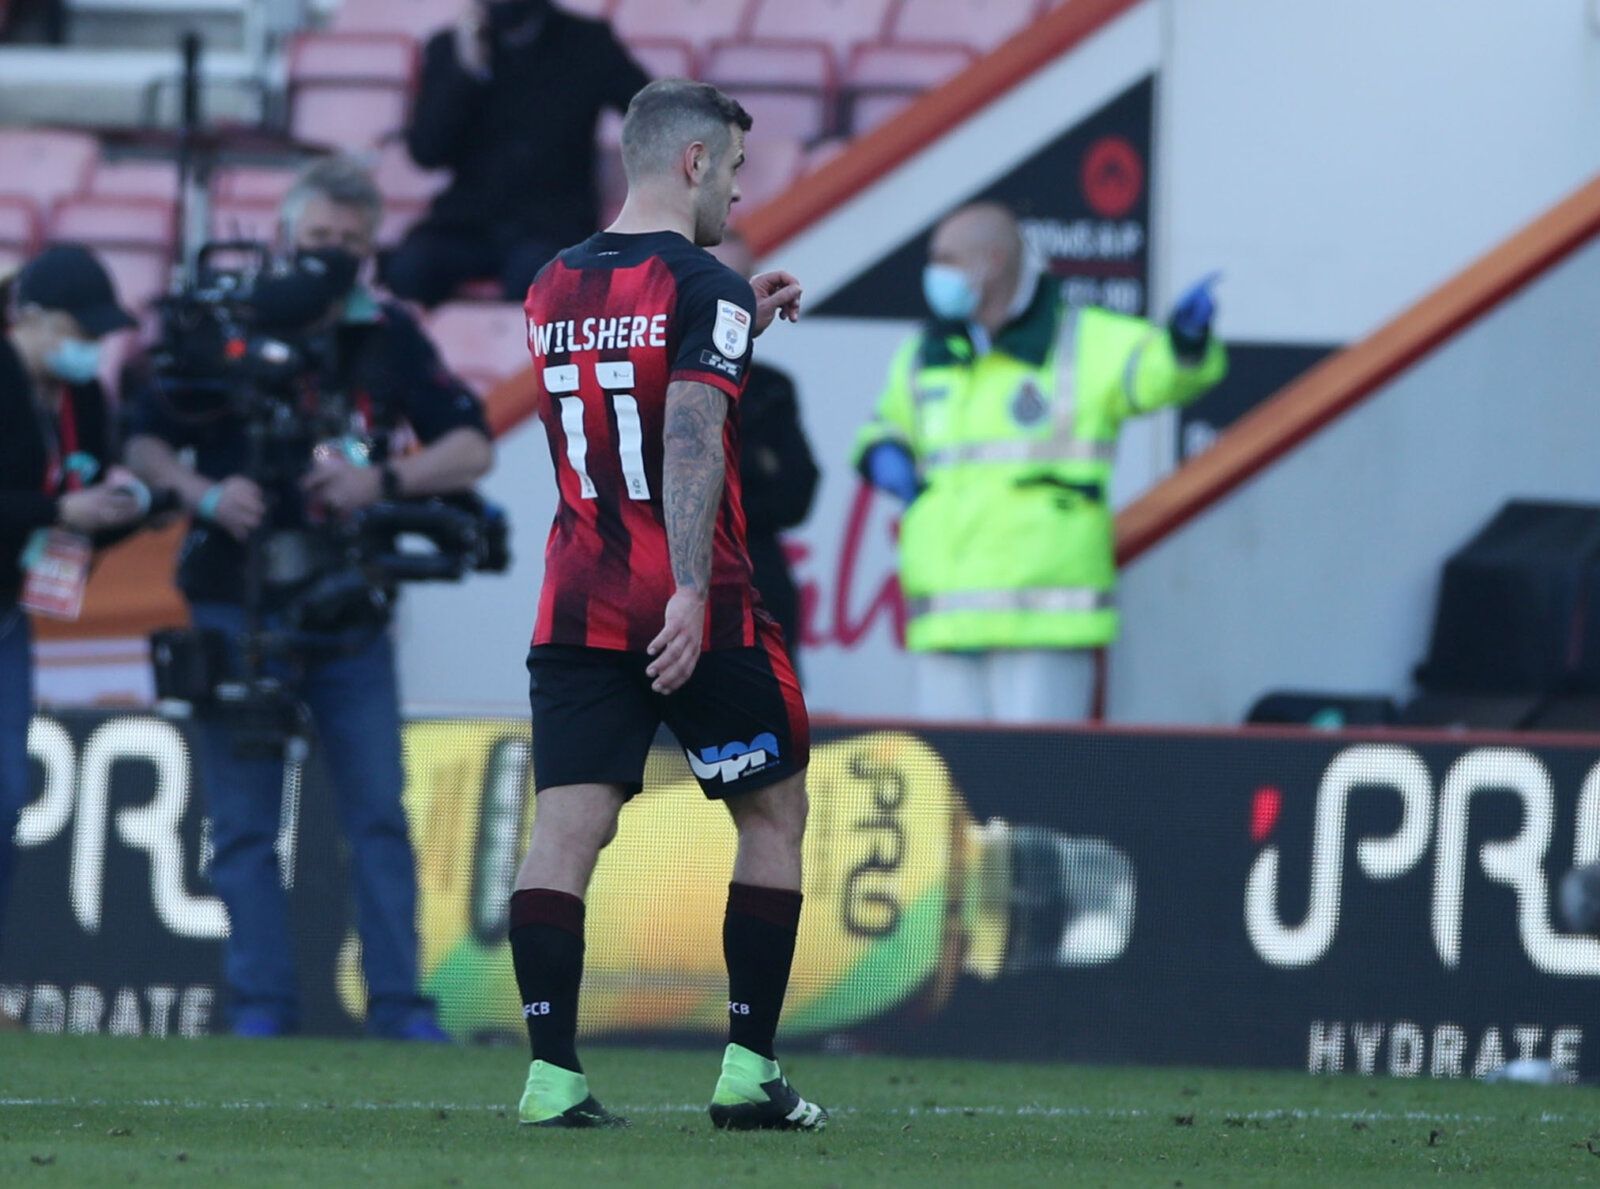 Soccer Football - Championship - AFC Bournemouth v Watford - Vitality Stadium, Bournemouth, Britain - February 27, 2021 Bournemouth’s Jack Wilshere walks off after being shown a red card Action Images/Peter Cziborra EDITORIAL USE ONLY. No use with unauthorized audio, video, data, fixture lists, club/league logos or 'live' services. Online in-match use limited to 75 images, no video emulation. No use in betting, games or single club /league/player publications.  Please contact your account repres